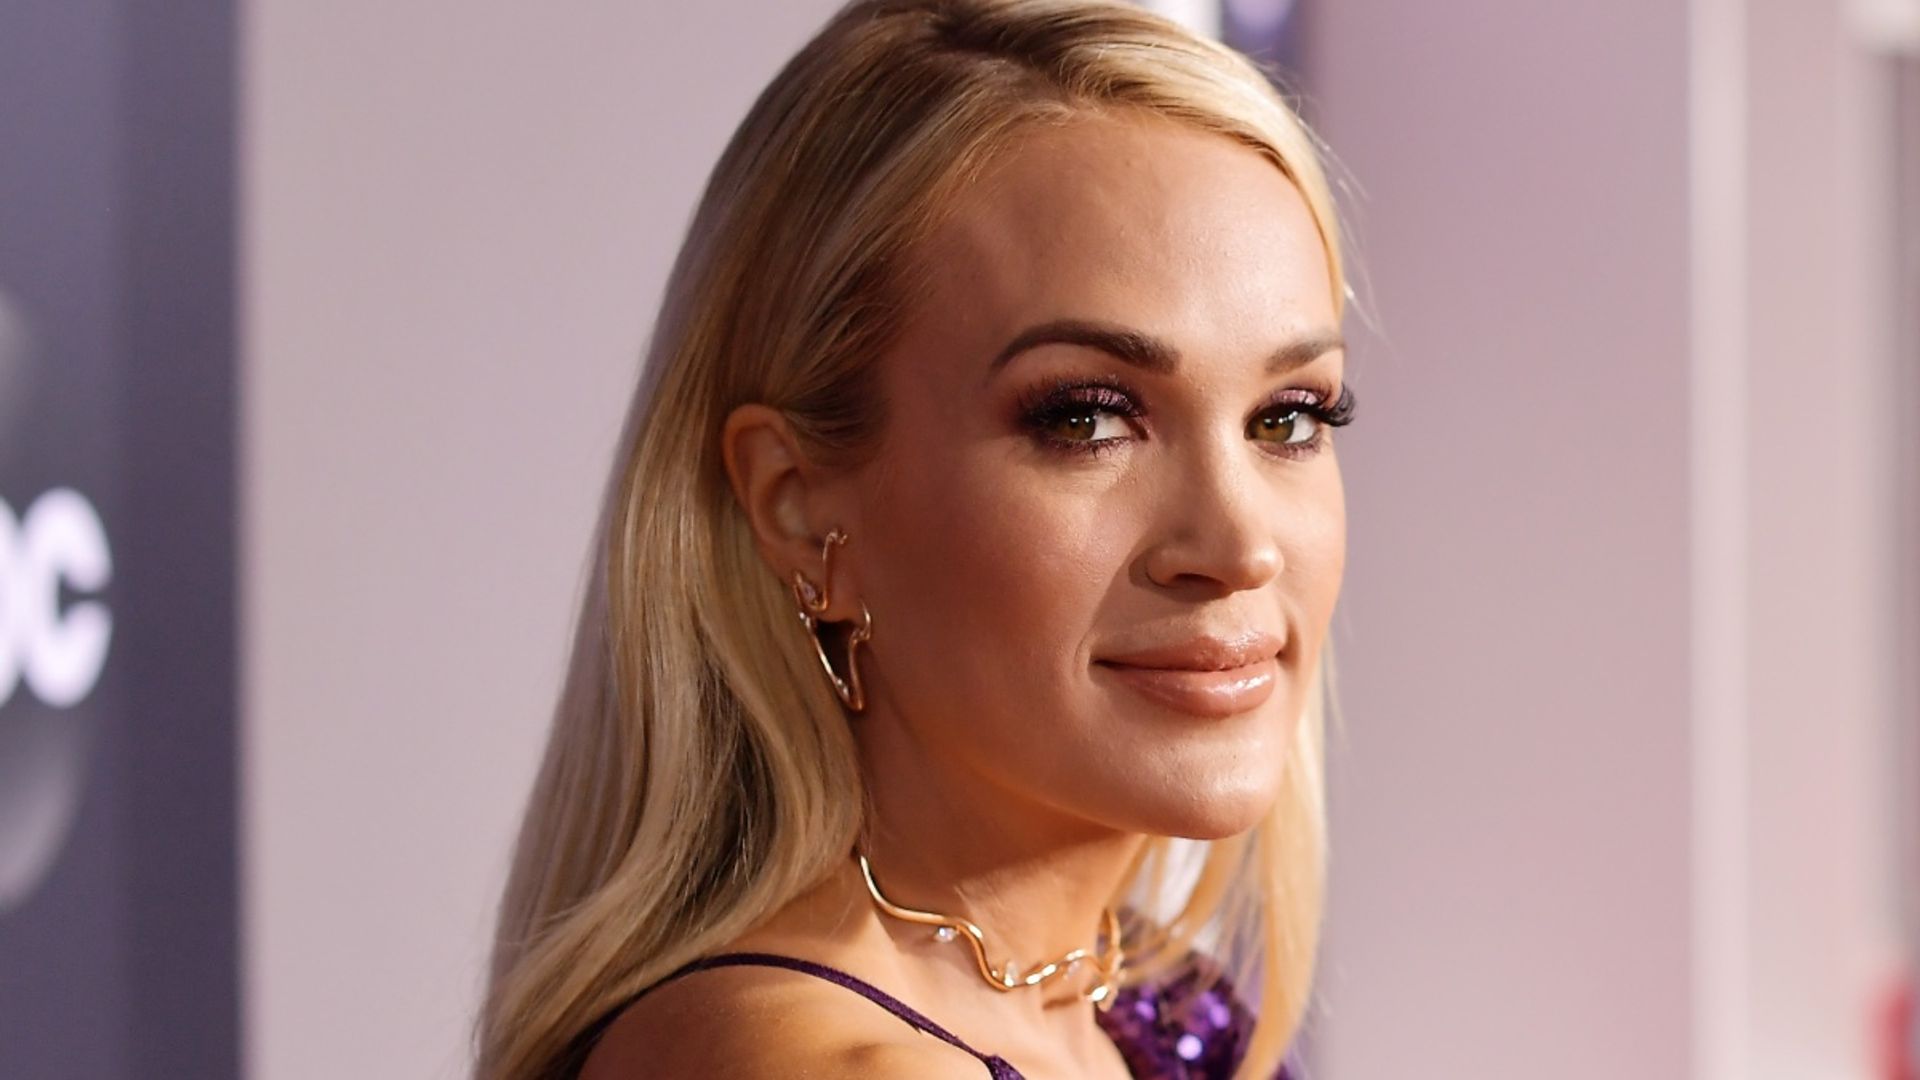 Carrie Underwood encourages fans with a fun new workout challenge